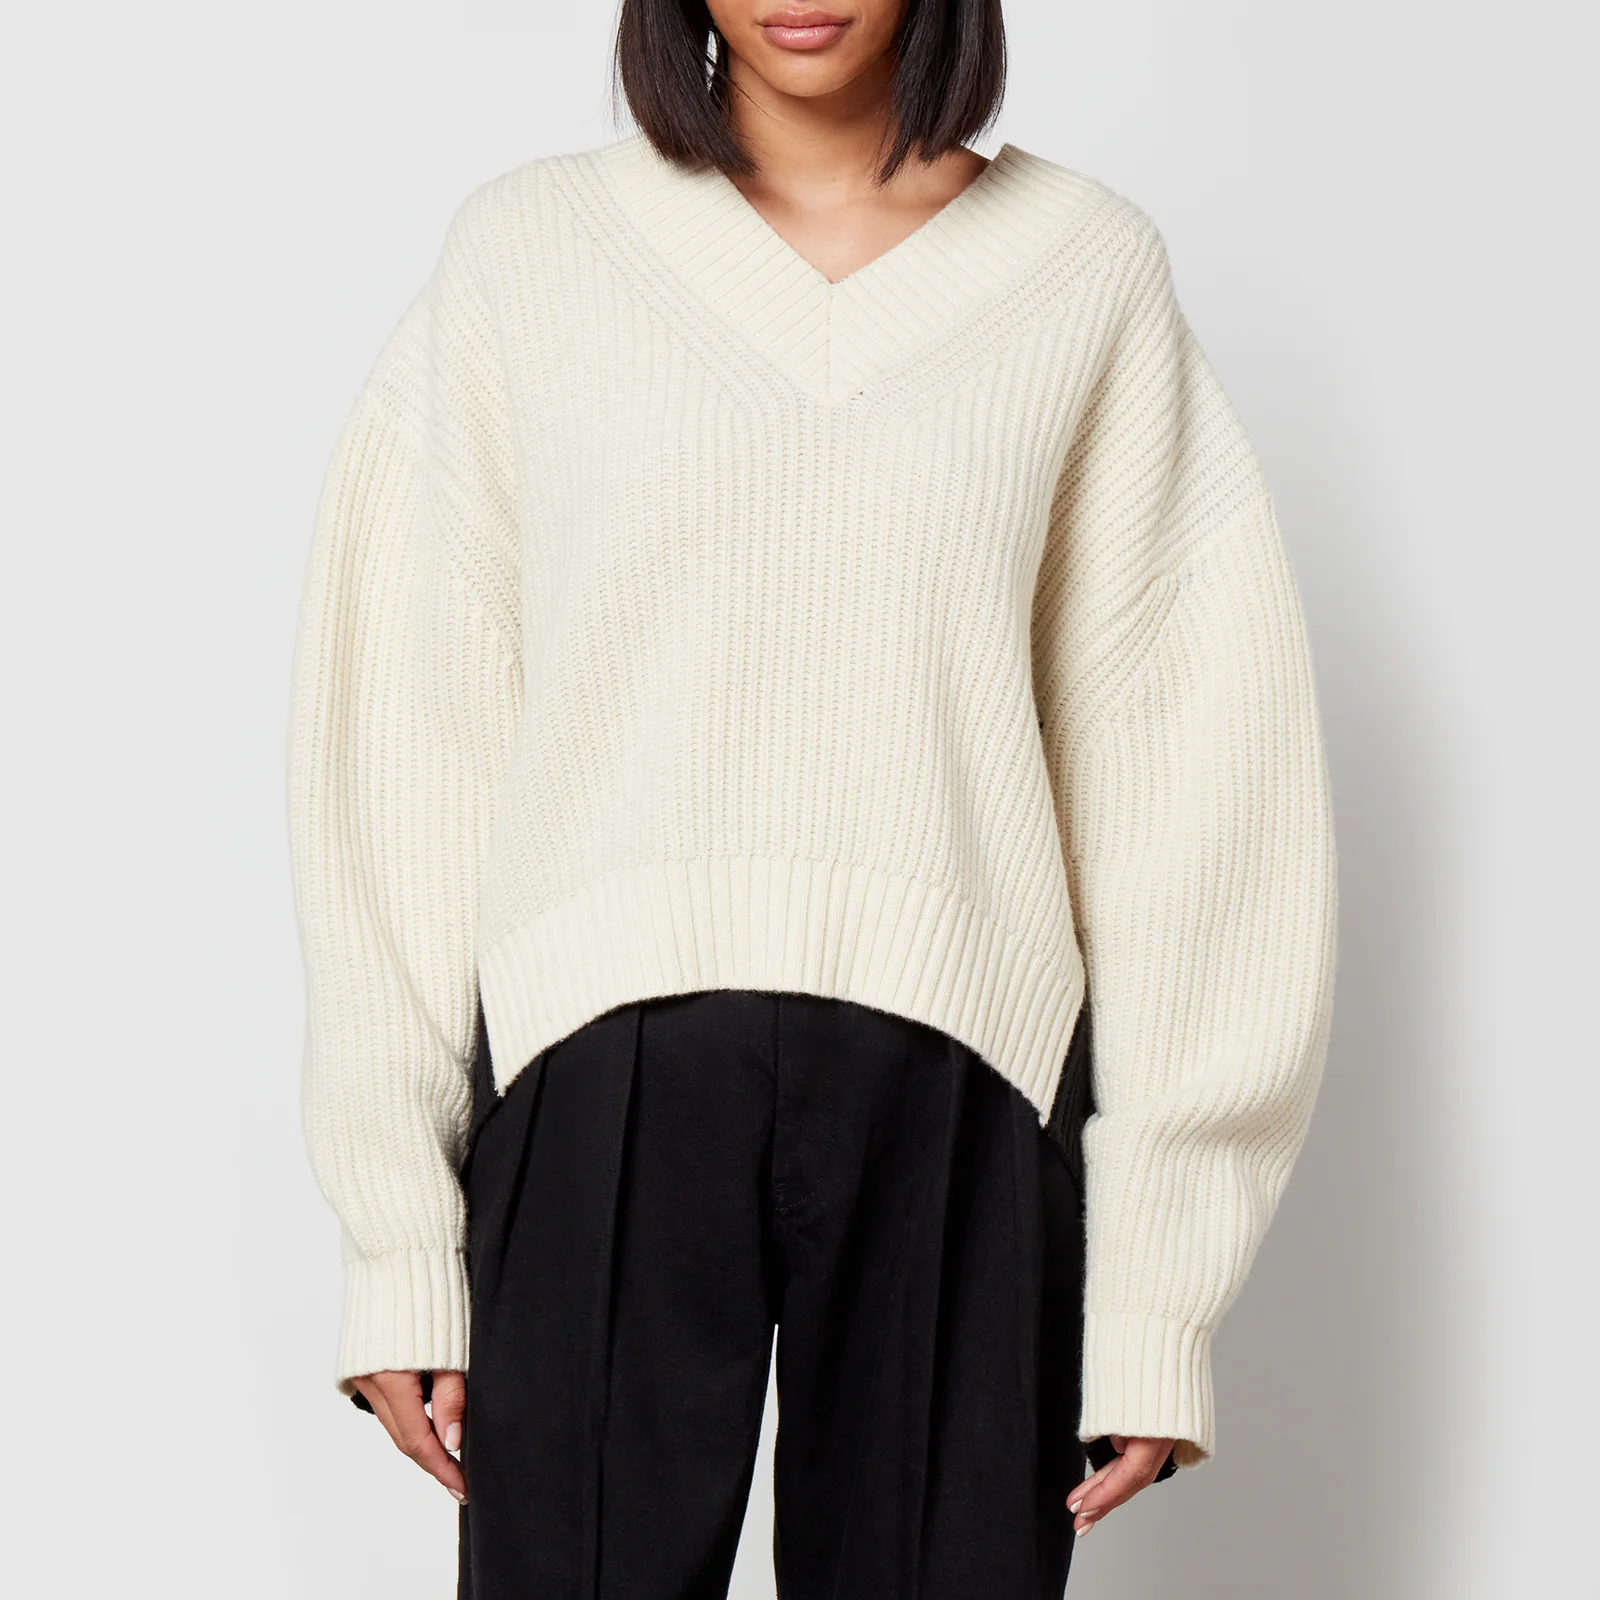 Axel Arigato Source Wool-Blend Jumper Image 1